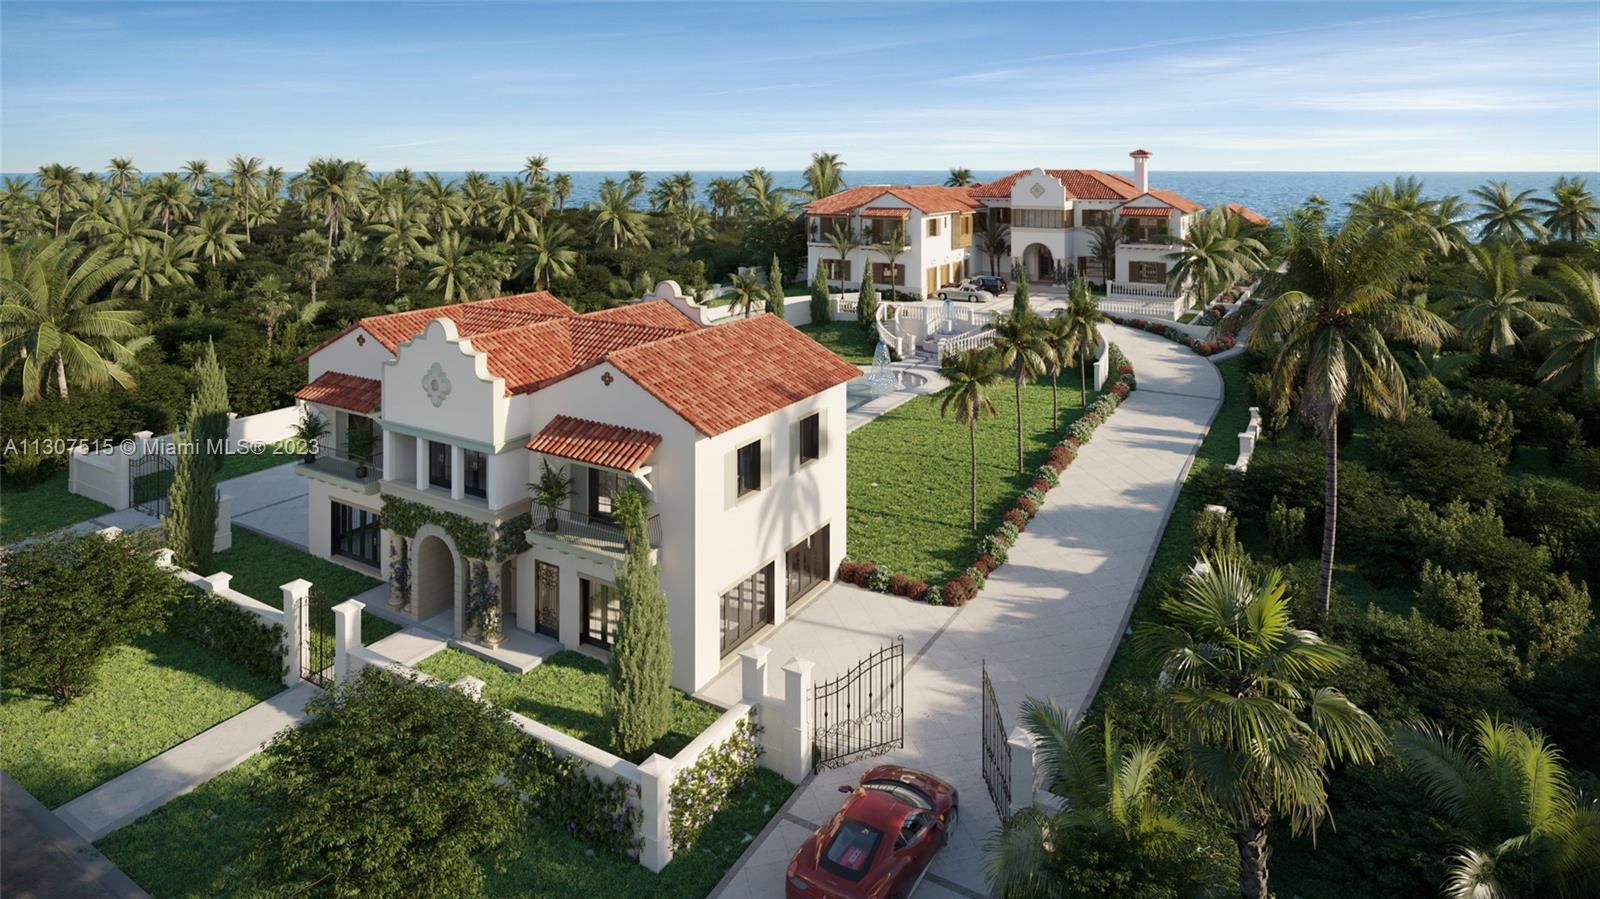 Welcome to Villa Azur. A 16,000sf +/- Mediterranean estate  that includes a 4 bed guest house and a 1 bed 1 bath pool house. Dive in the opulence of the Addison Mizner era, with a blend of classic charm and modern elegance. The interiors are a designer's dream, that exude sophistication. The outdoor oasis, with 150' of direct ocean frontage and an infinity edge pool will leave you breathless. Symmetrical design, offering a sense of balance and harmony. Indulge in the finest dining experience in the stunning loggia, or relax in the Champagne Room, taking in the magnificent sunsets. The gym, library, theater, game room, and 1k bottle wine cellar provide endless entertainment possibilities. Villa Azur is a masterpiece sitting on the highest point in Manalapan making it the best deal out there